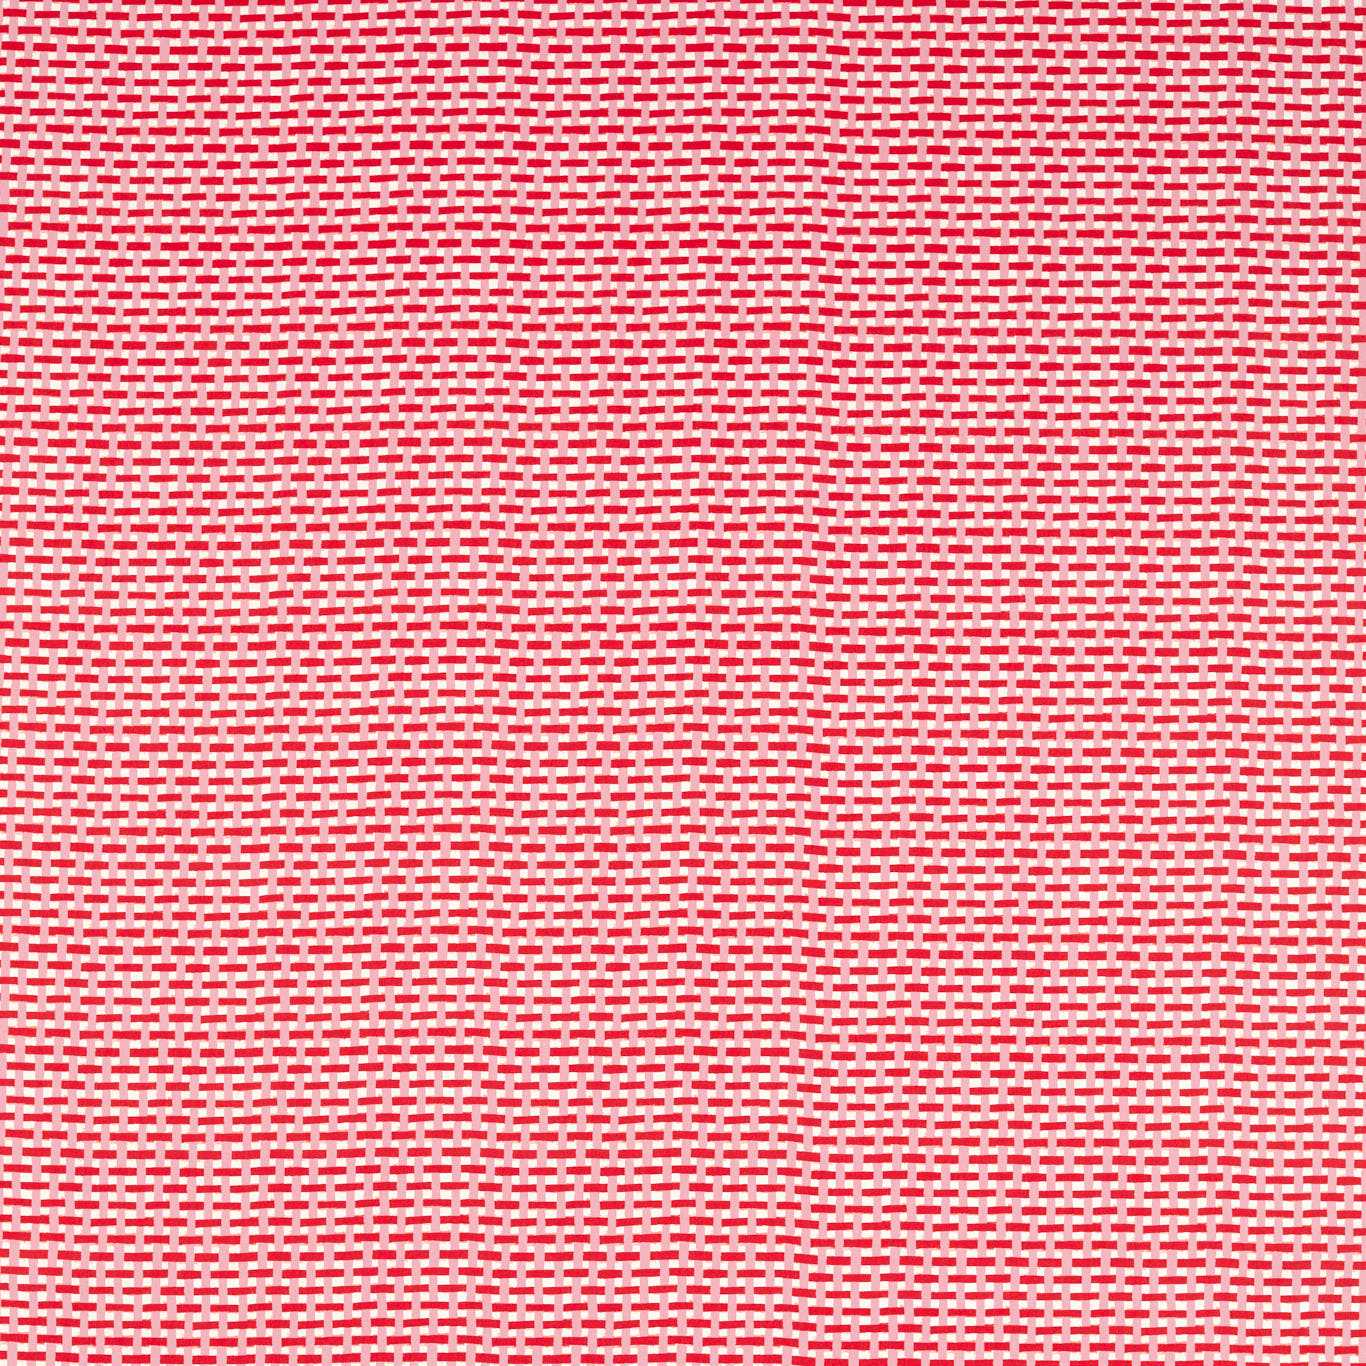 Basket Weave Coral/Rose Fabric by HAR